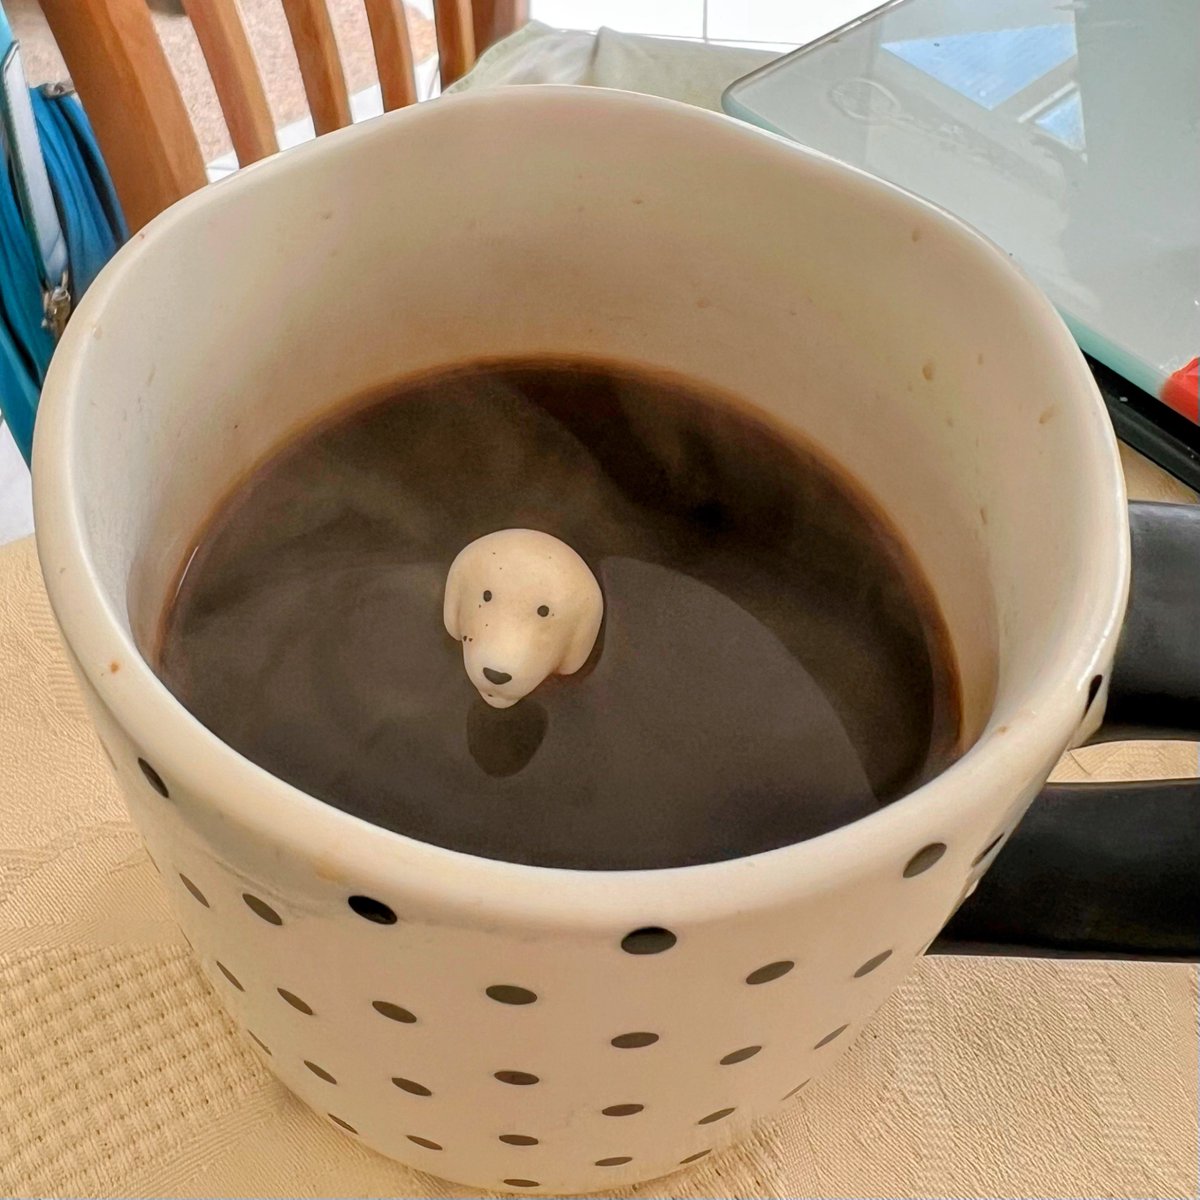 I bought my dad some mugs with little ceramic doggos at the bottom. He just handed me coffee, but, ‘I can’t fill it up more than that or the dog will drown.’